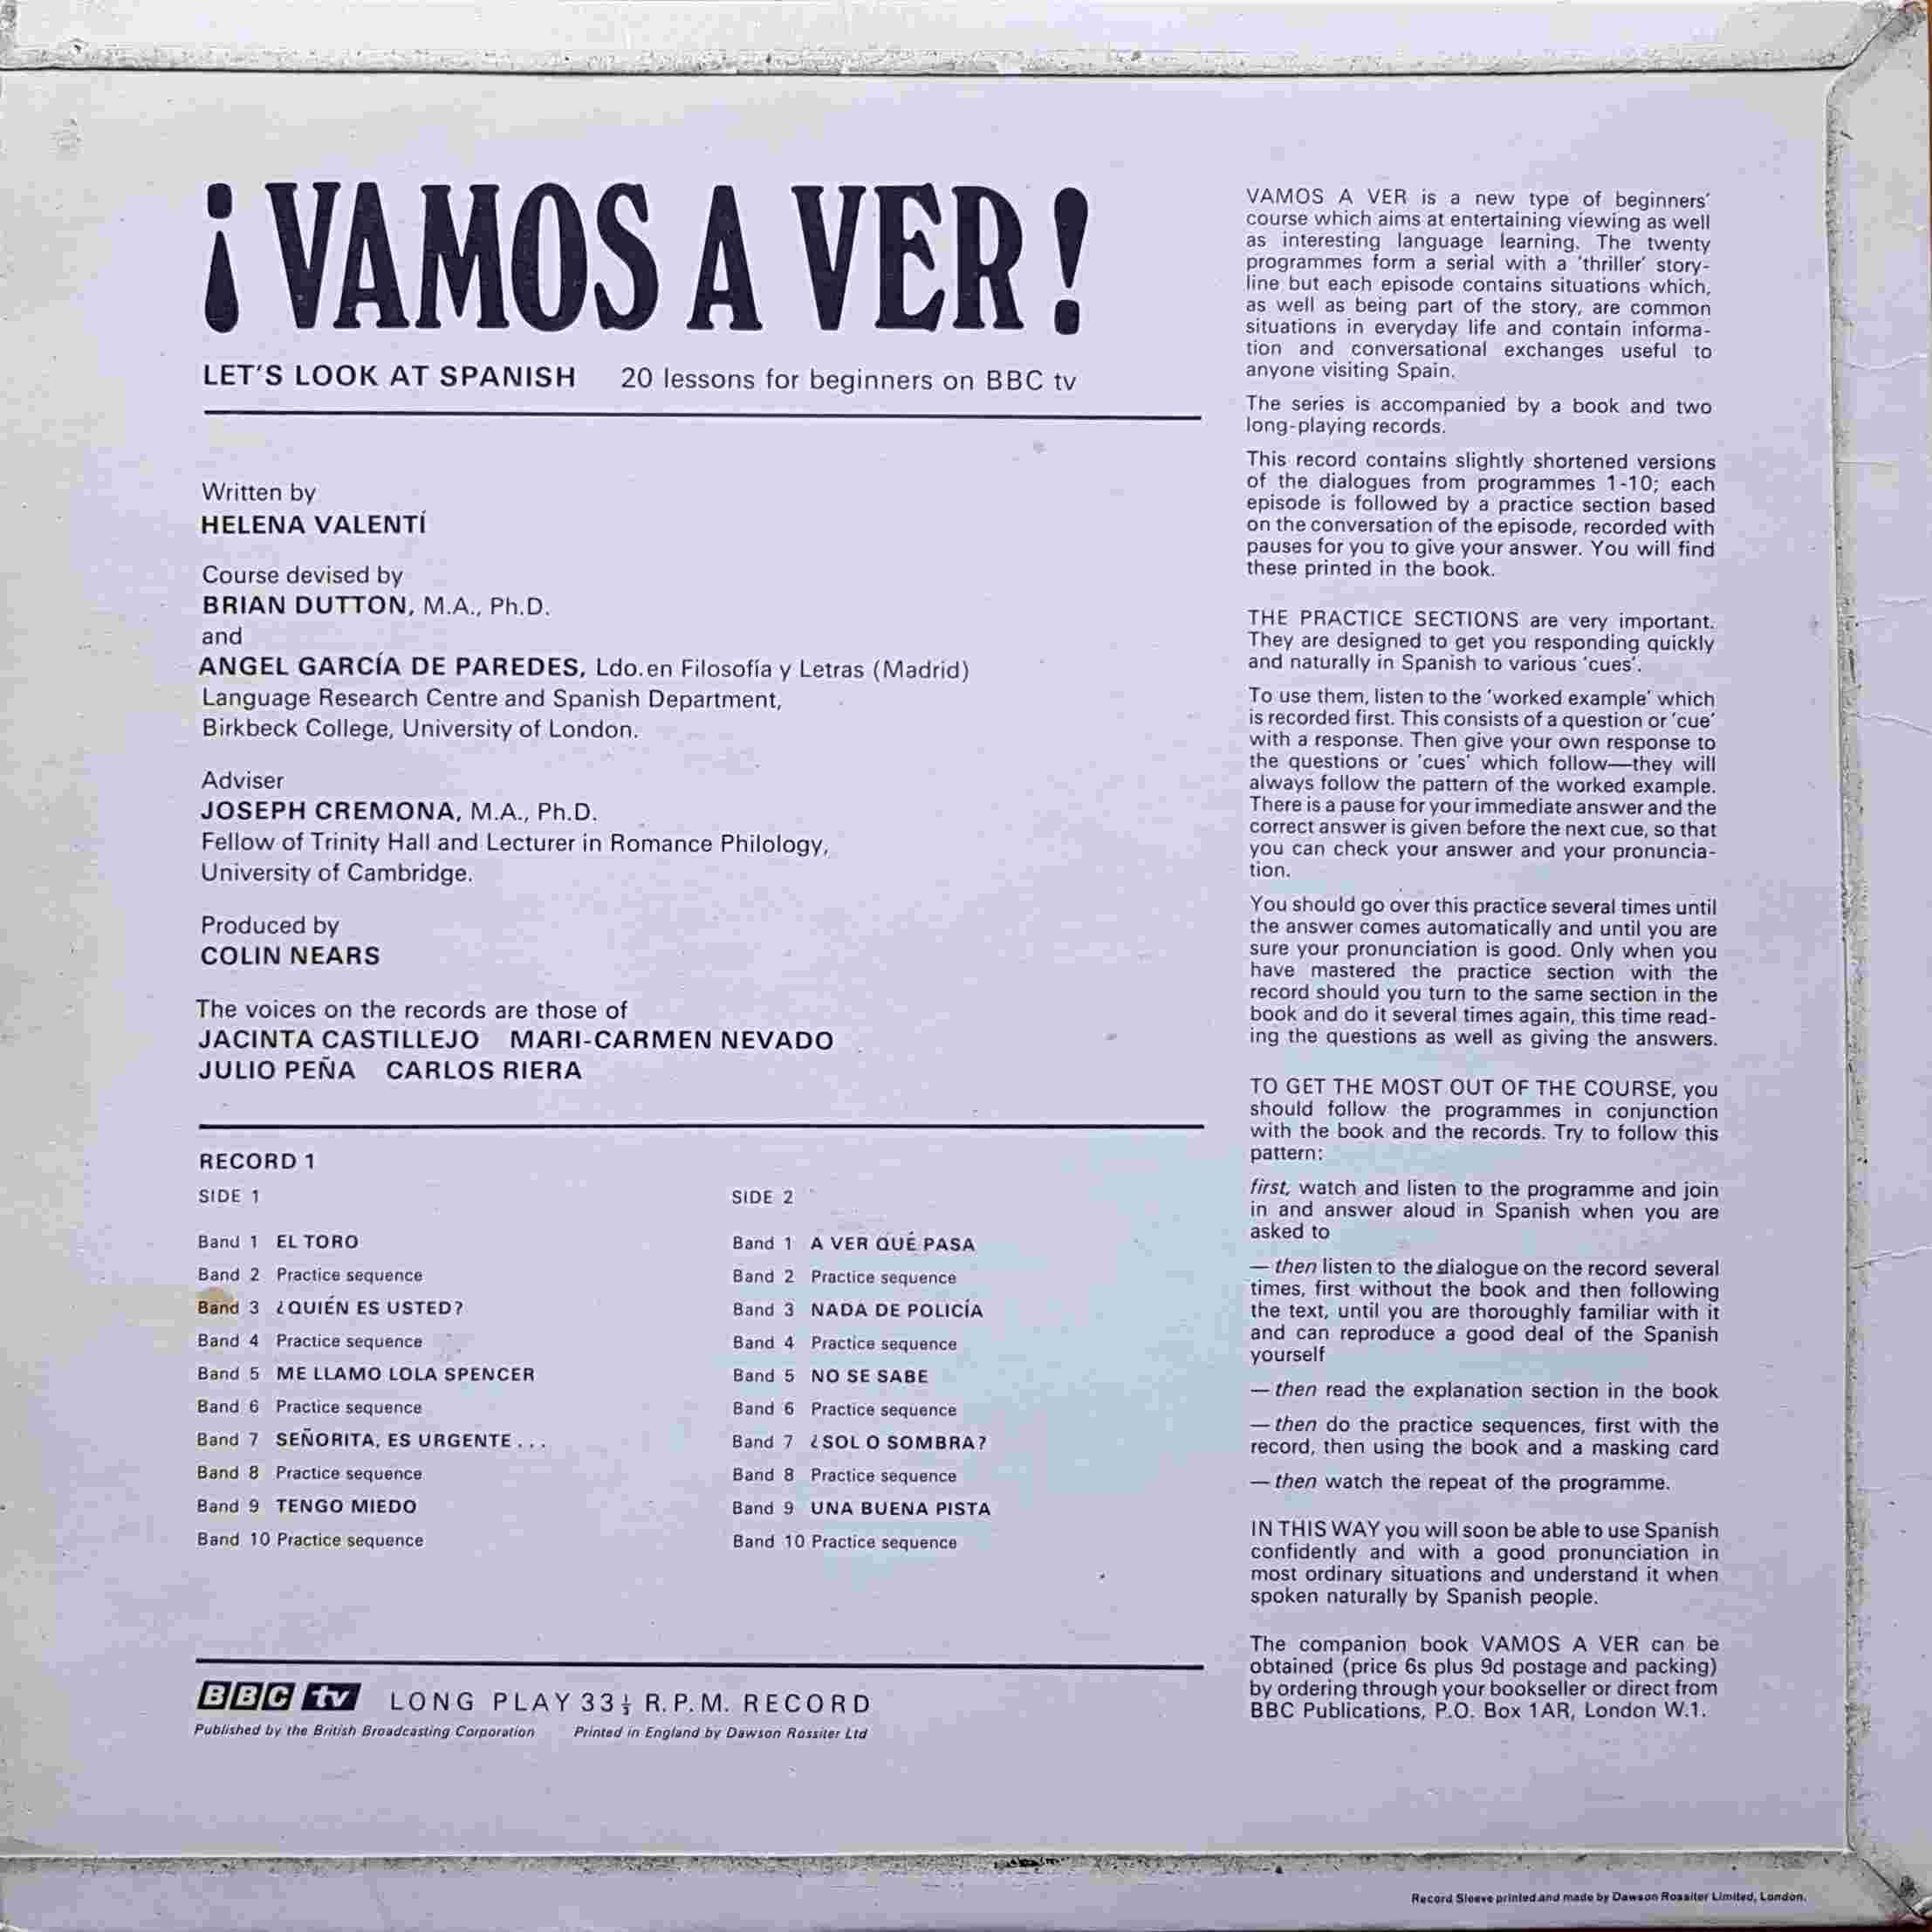 Picture of OP 109/110 Vamos A Ver - Let's look at Spanish on BBC tv - Record 1 by artist Helena Valenti / Brian Dutton / Angel Garcia De Paredes / Joseph Cremona from the BBC records and Tapes library